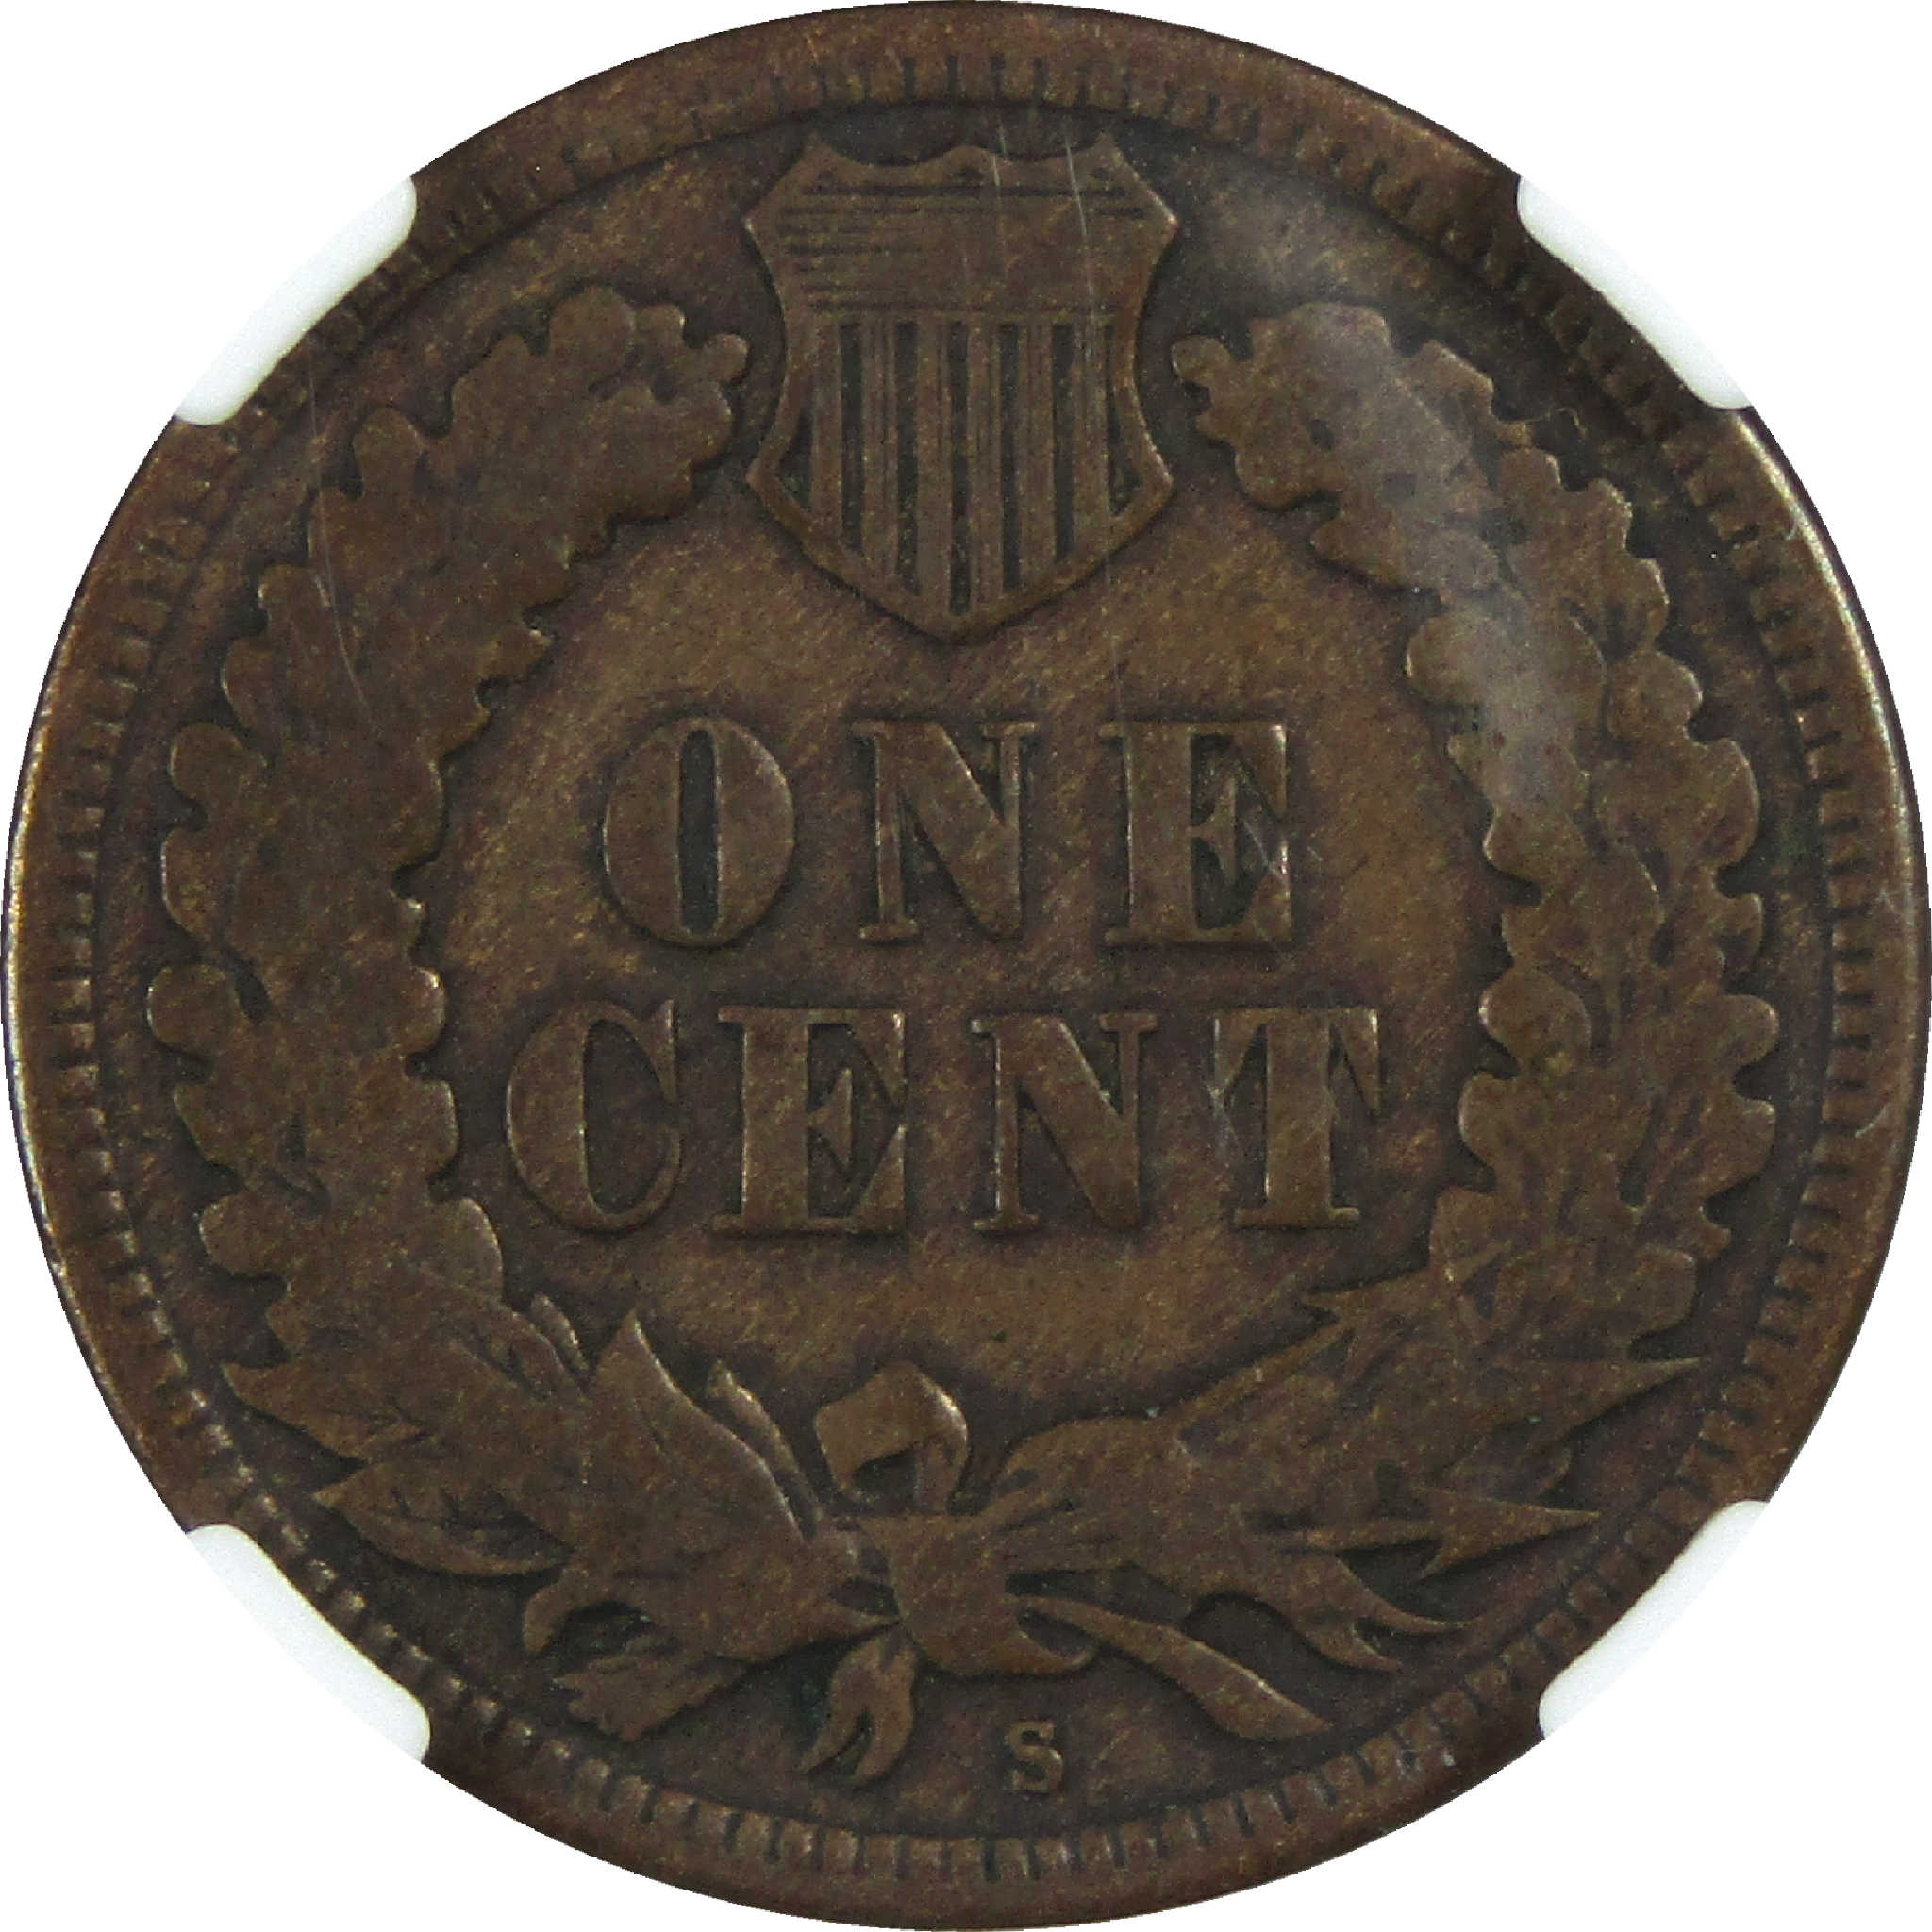 1908 S Indian Head Cent VG 10 BN NGC Penny 1c Coin SKU:I13216